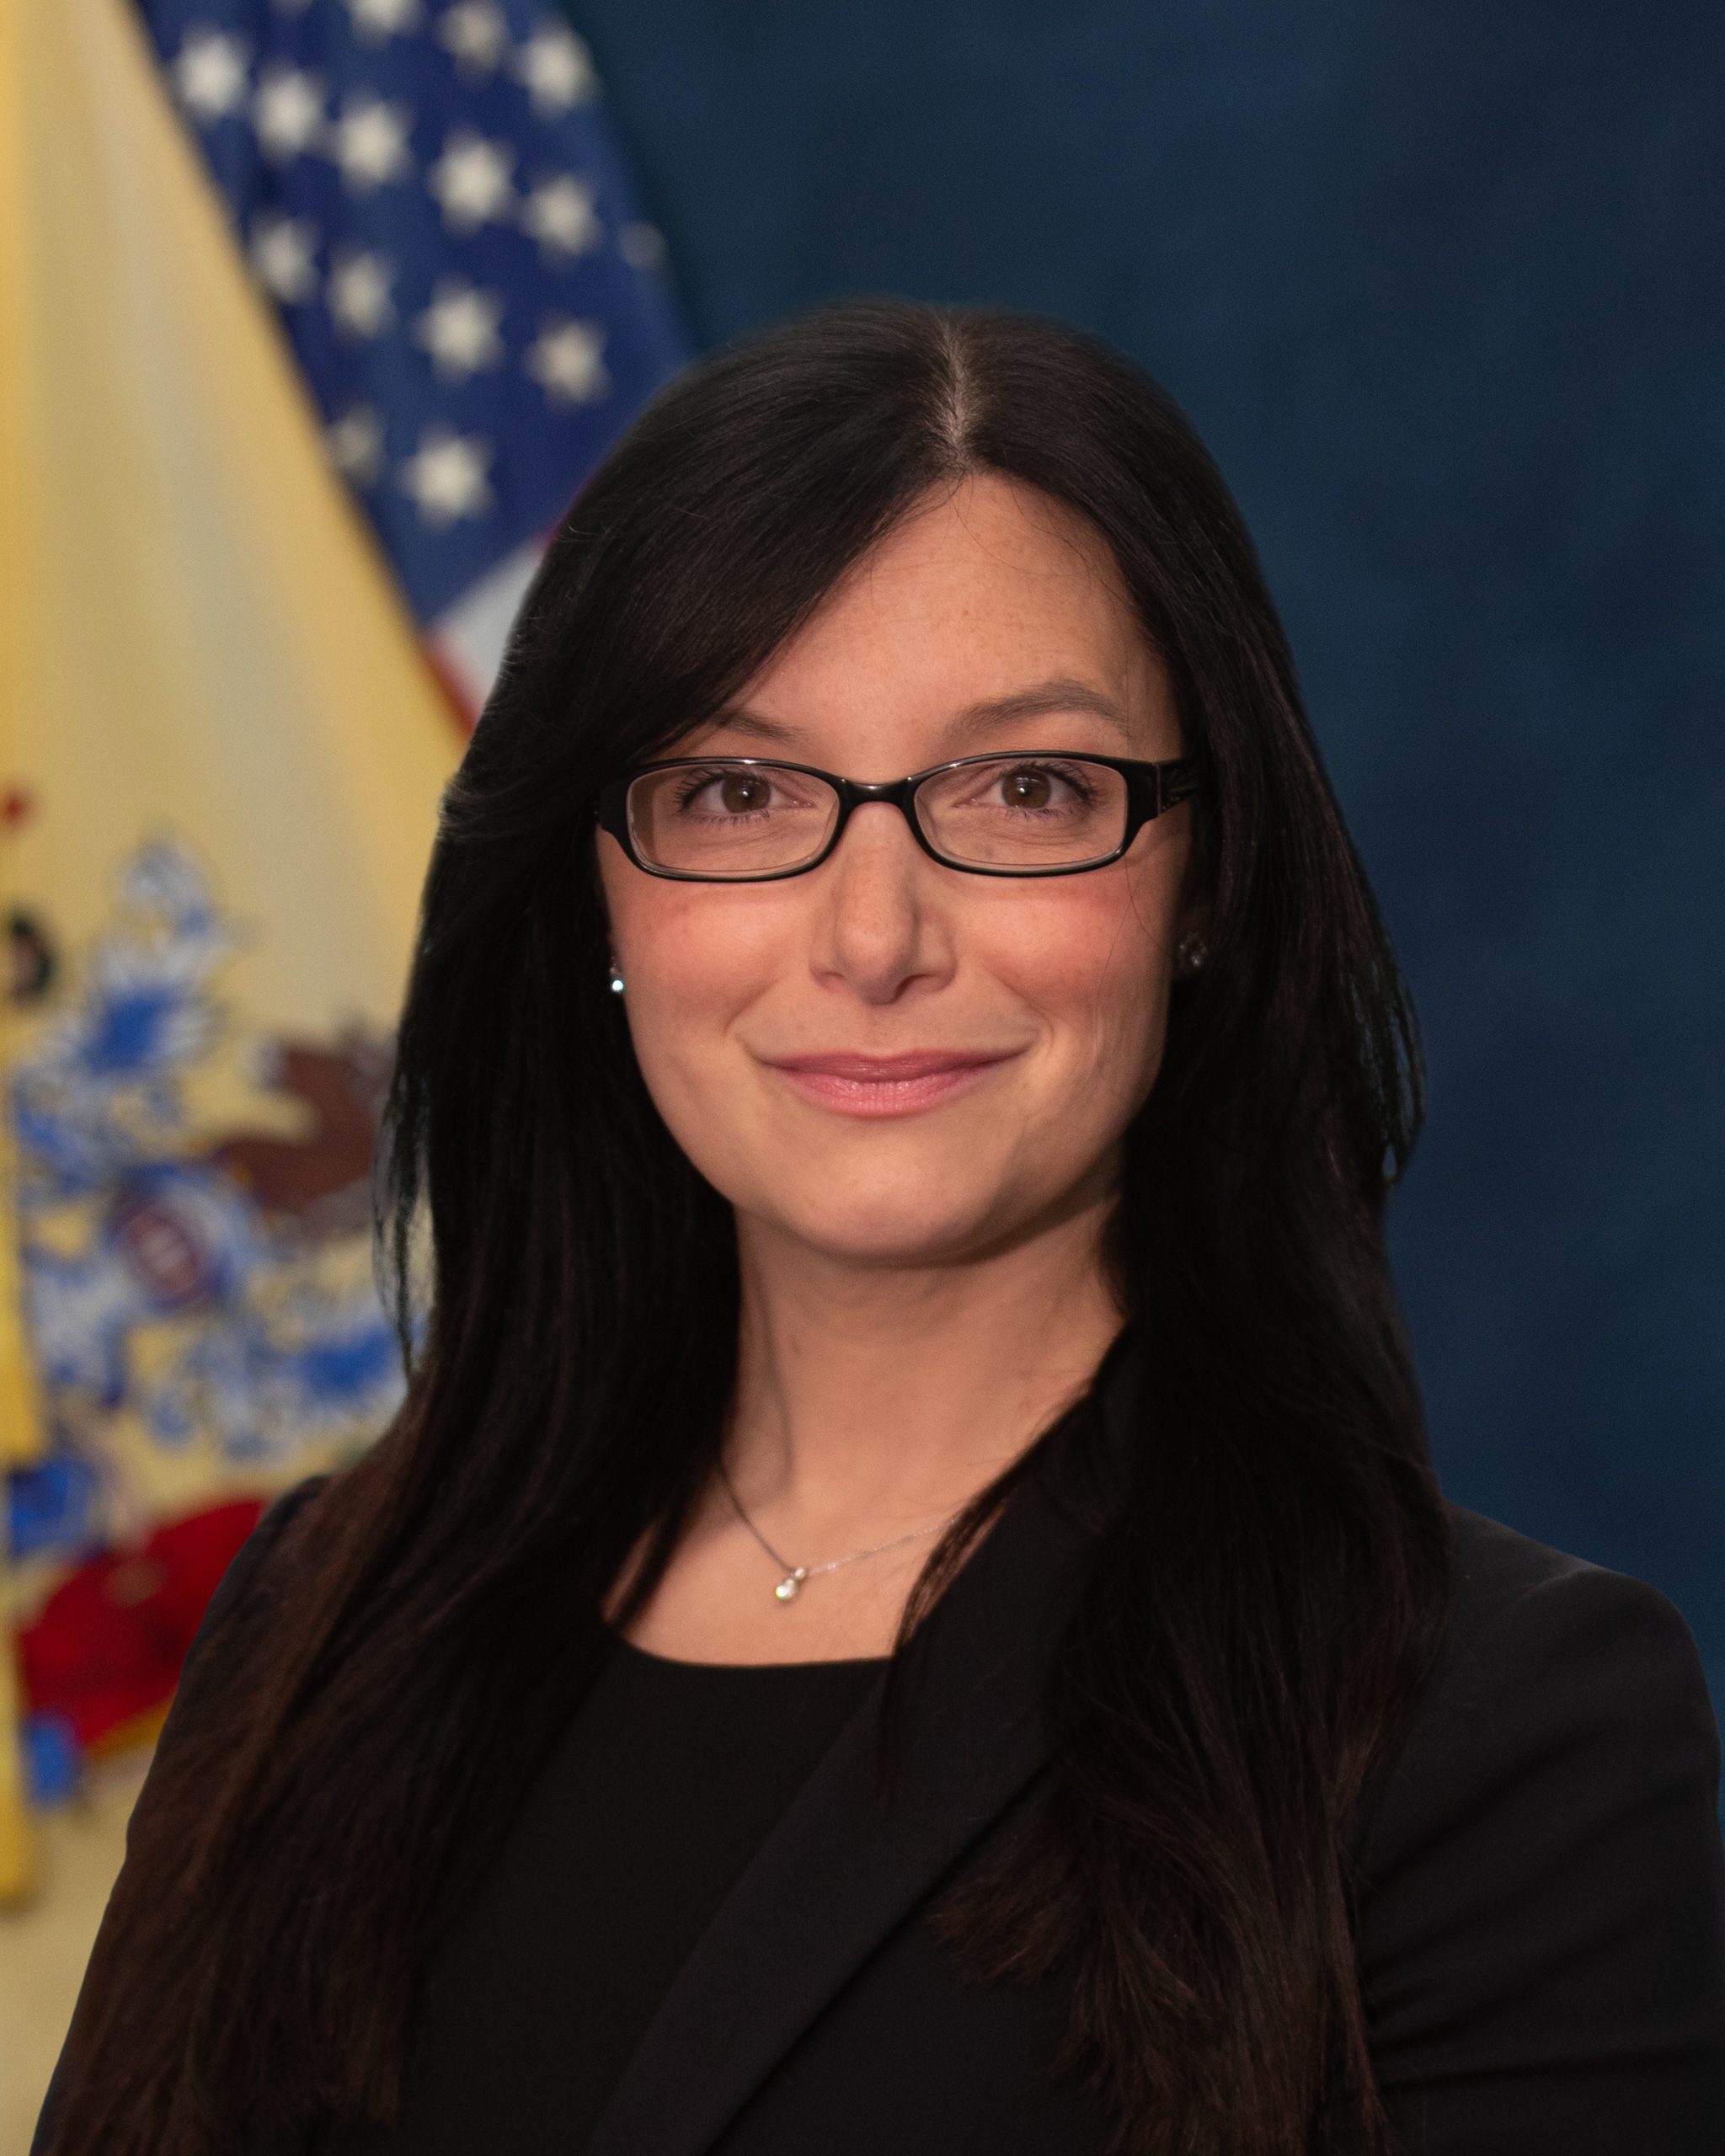 </p>
<h3 style="color:white;">Lyndsay V. Ruotolo</h3>
<h5 style="color:white;font-style:italic;">First Assistant Attorney General</h5>
<p>